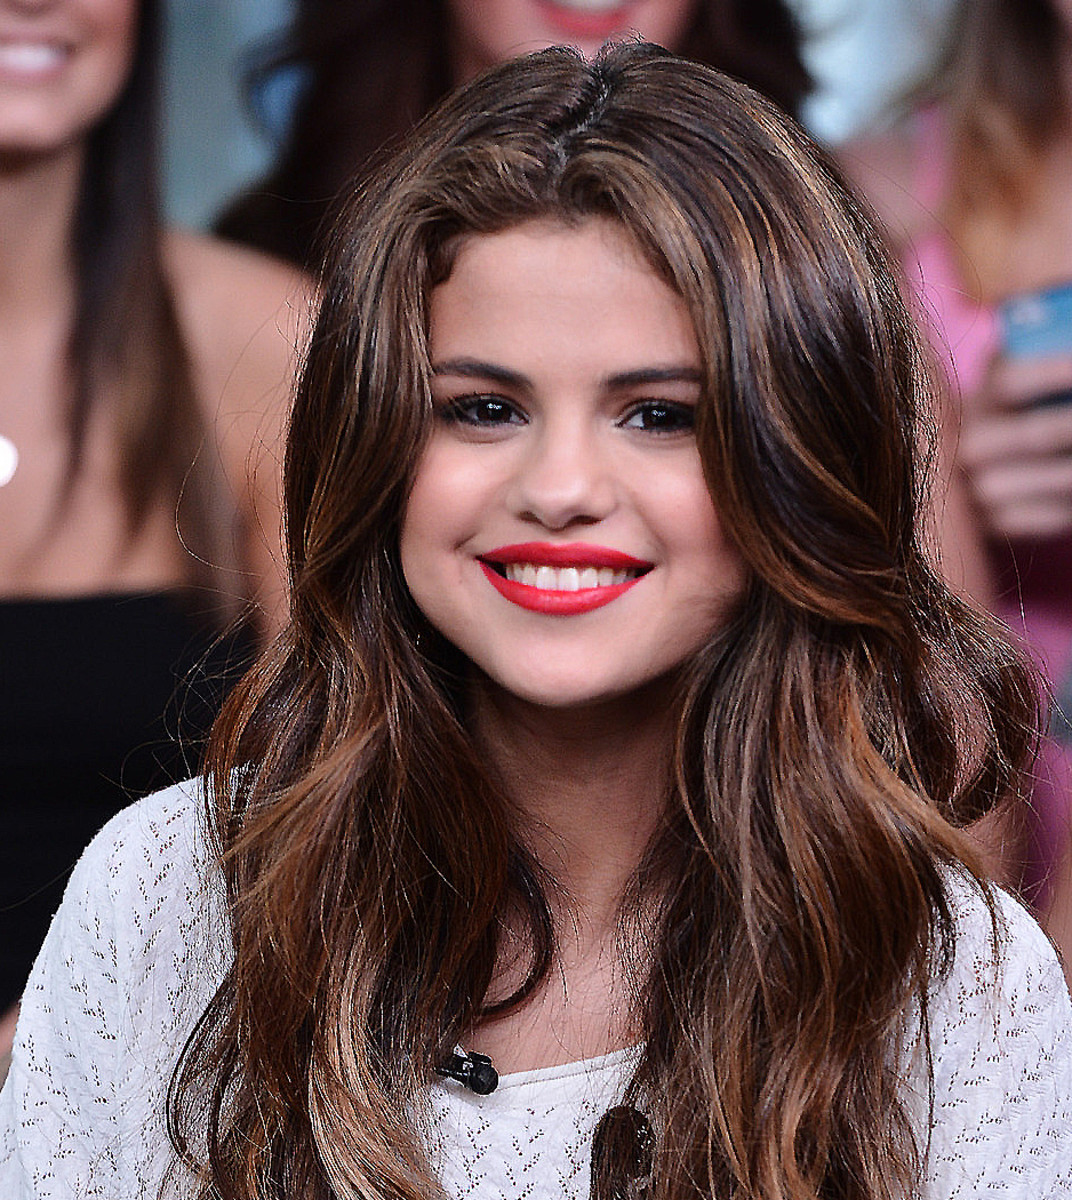 Selena Gomez's makeup artist for this look tells us how to do it